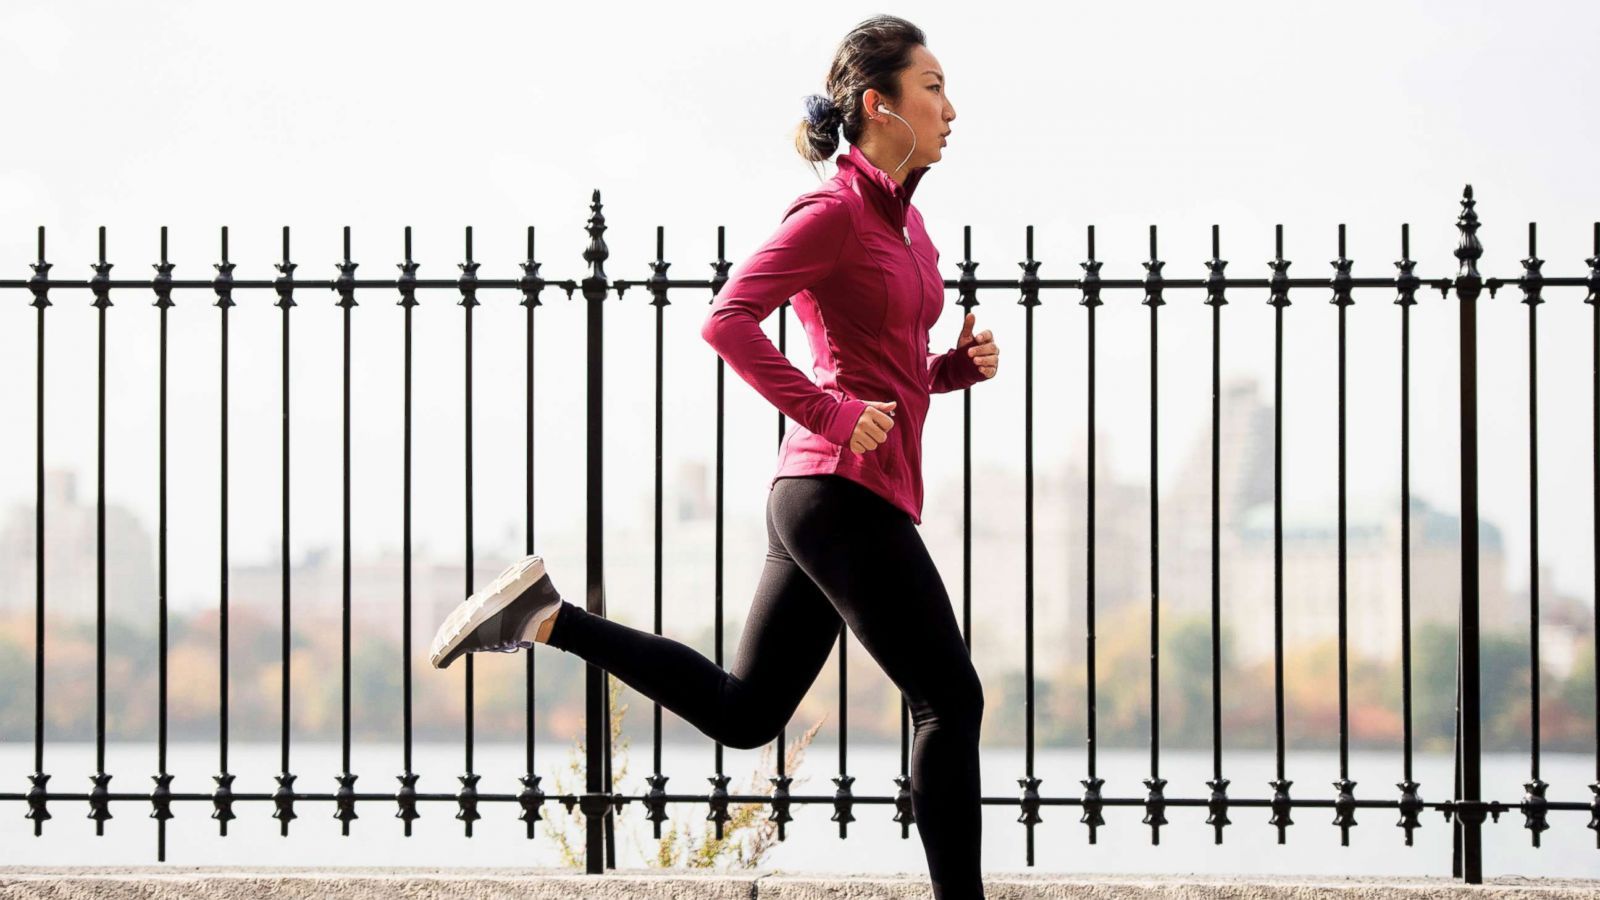 How to run without pain: 7 tips to try